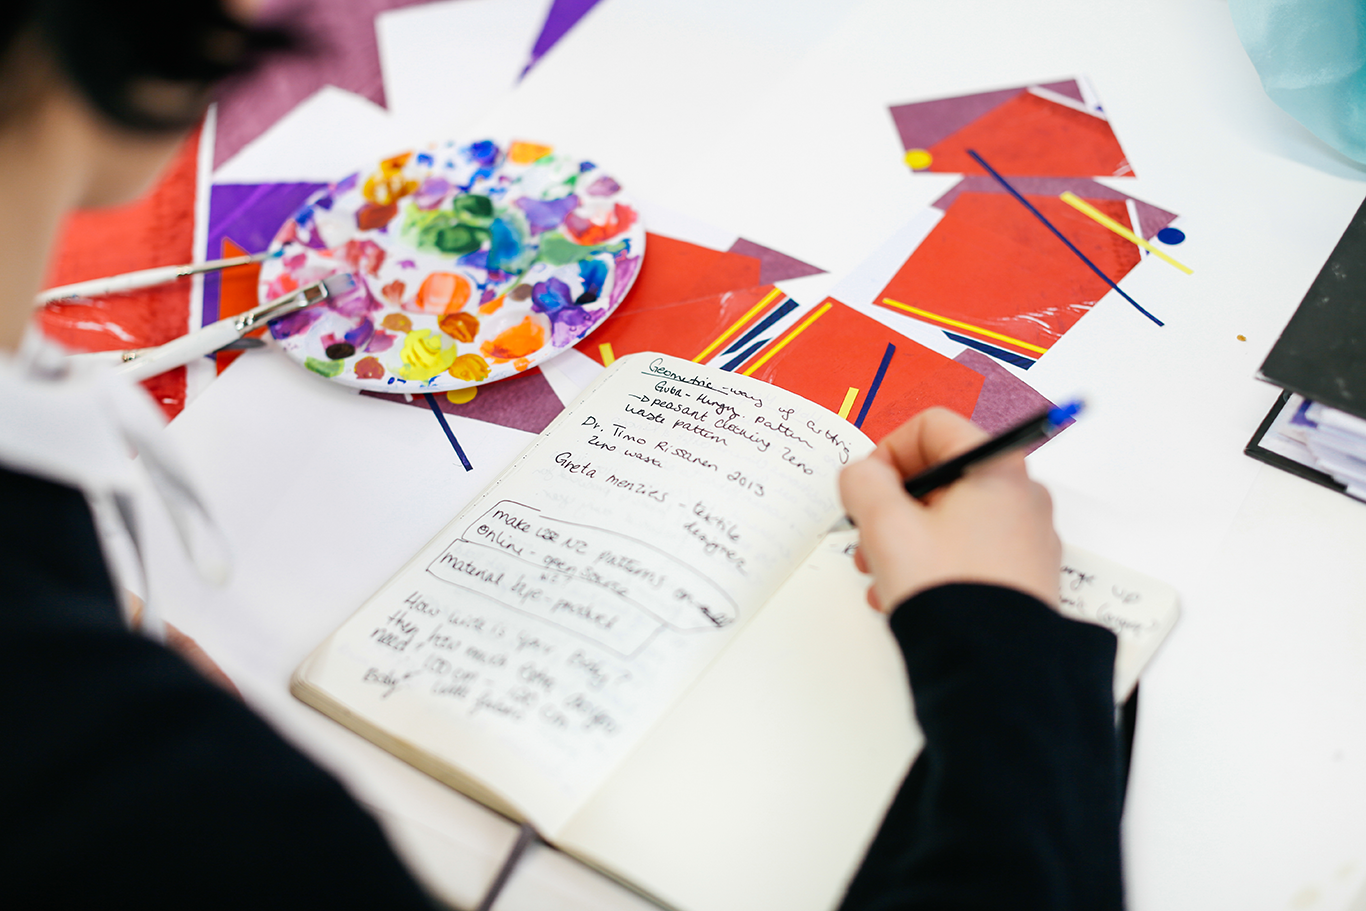 Overhead close-up of someone writing in a journal with colourful papers lying around on the table.